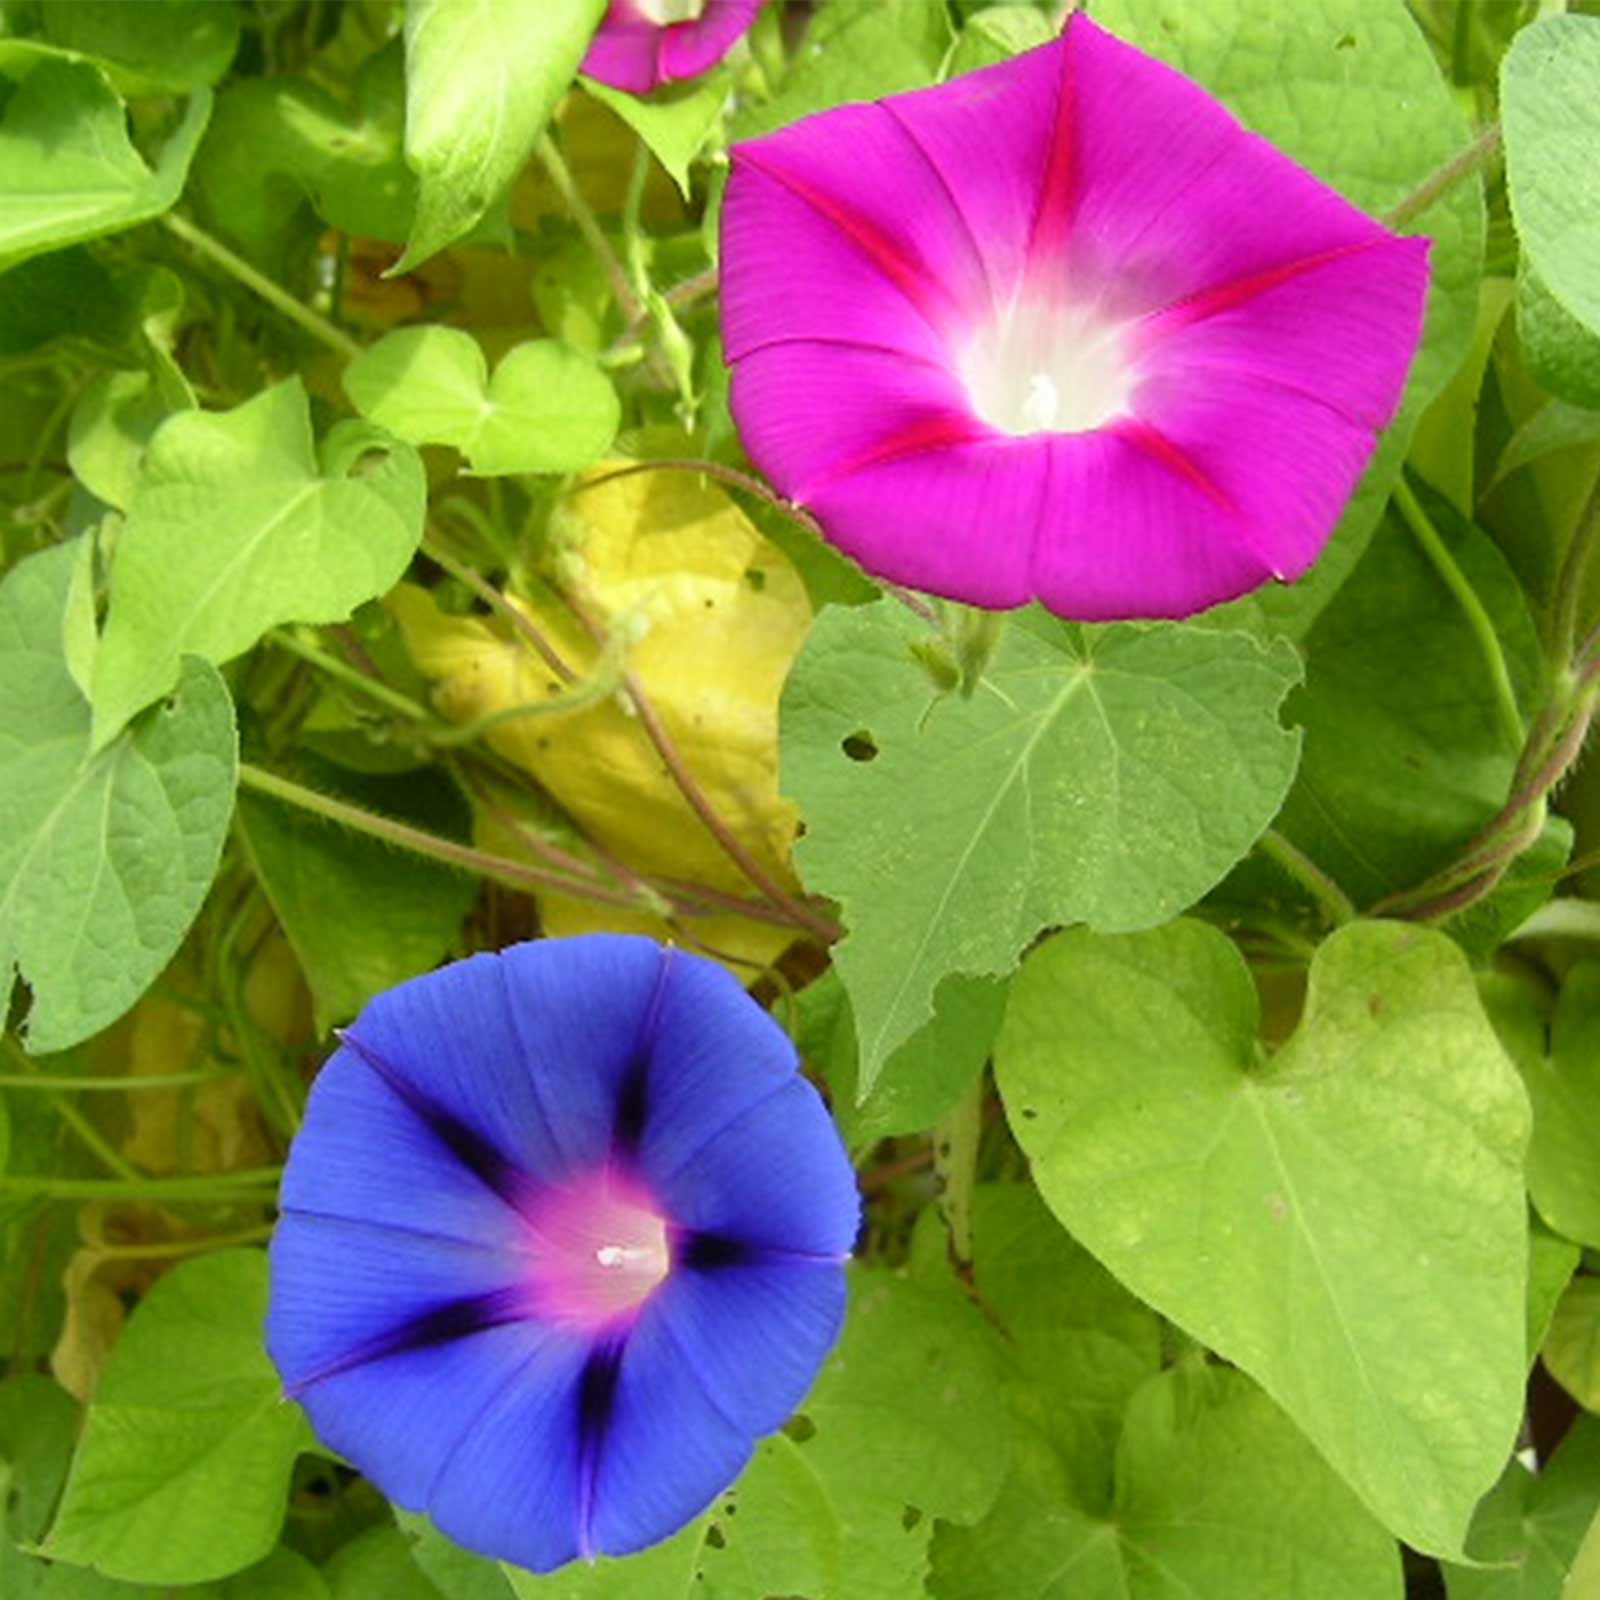 Morning Glory Flower Garden Seeds - Mixed Colors - 1 Oz - Annual Flower Gardening Seed - Ipomoea purpurea - image 1 of 2